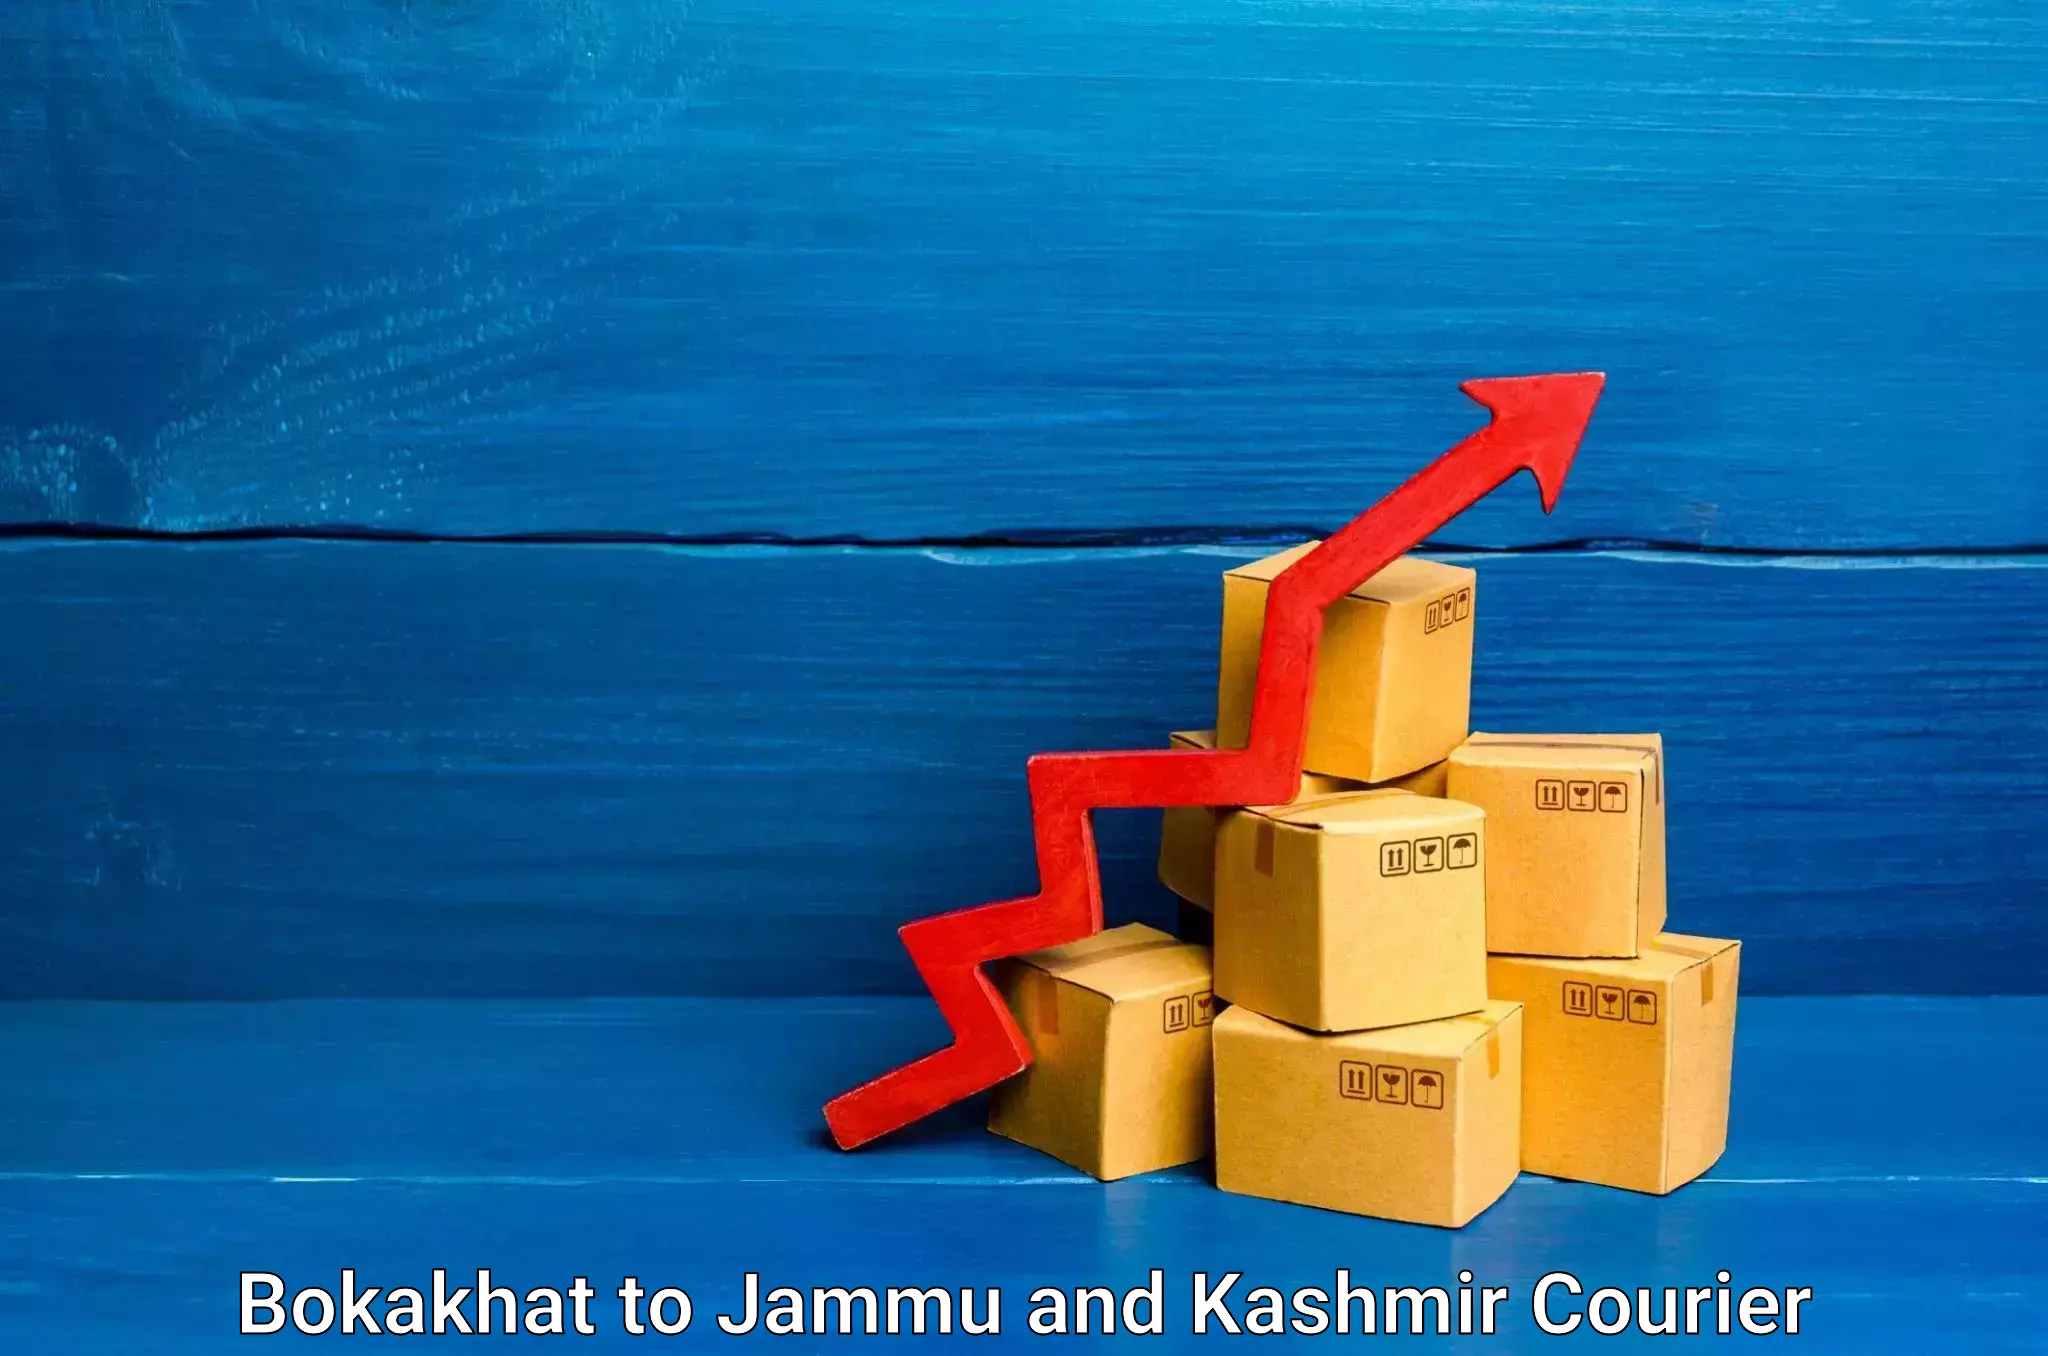 Speedy delivery service in Bokakhat to Jammu and Kashmir